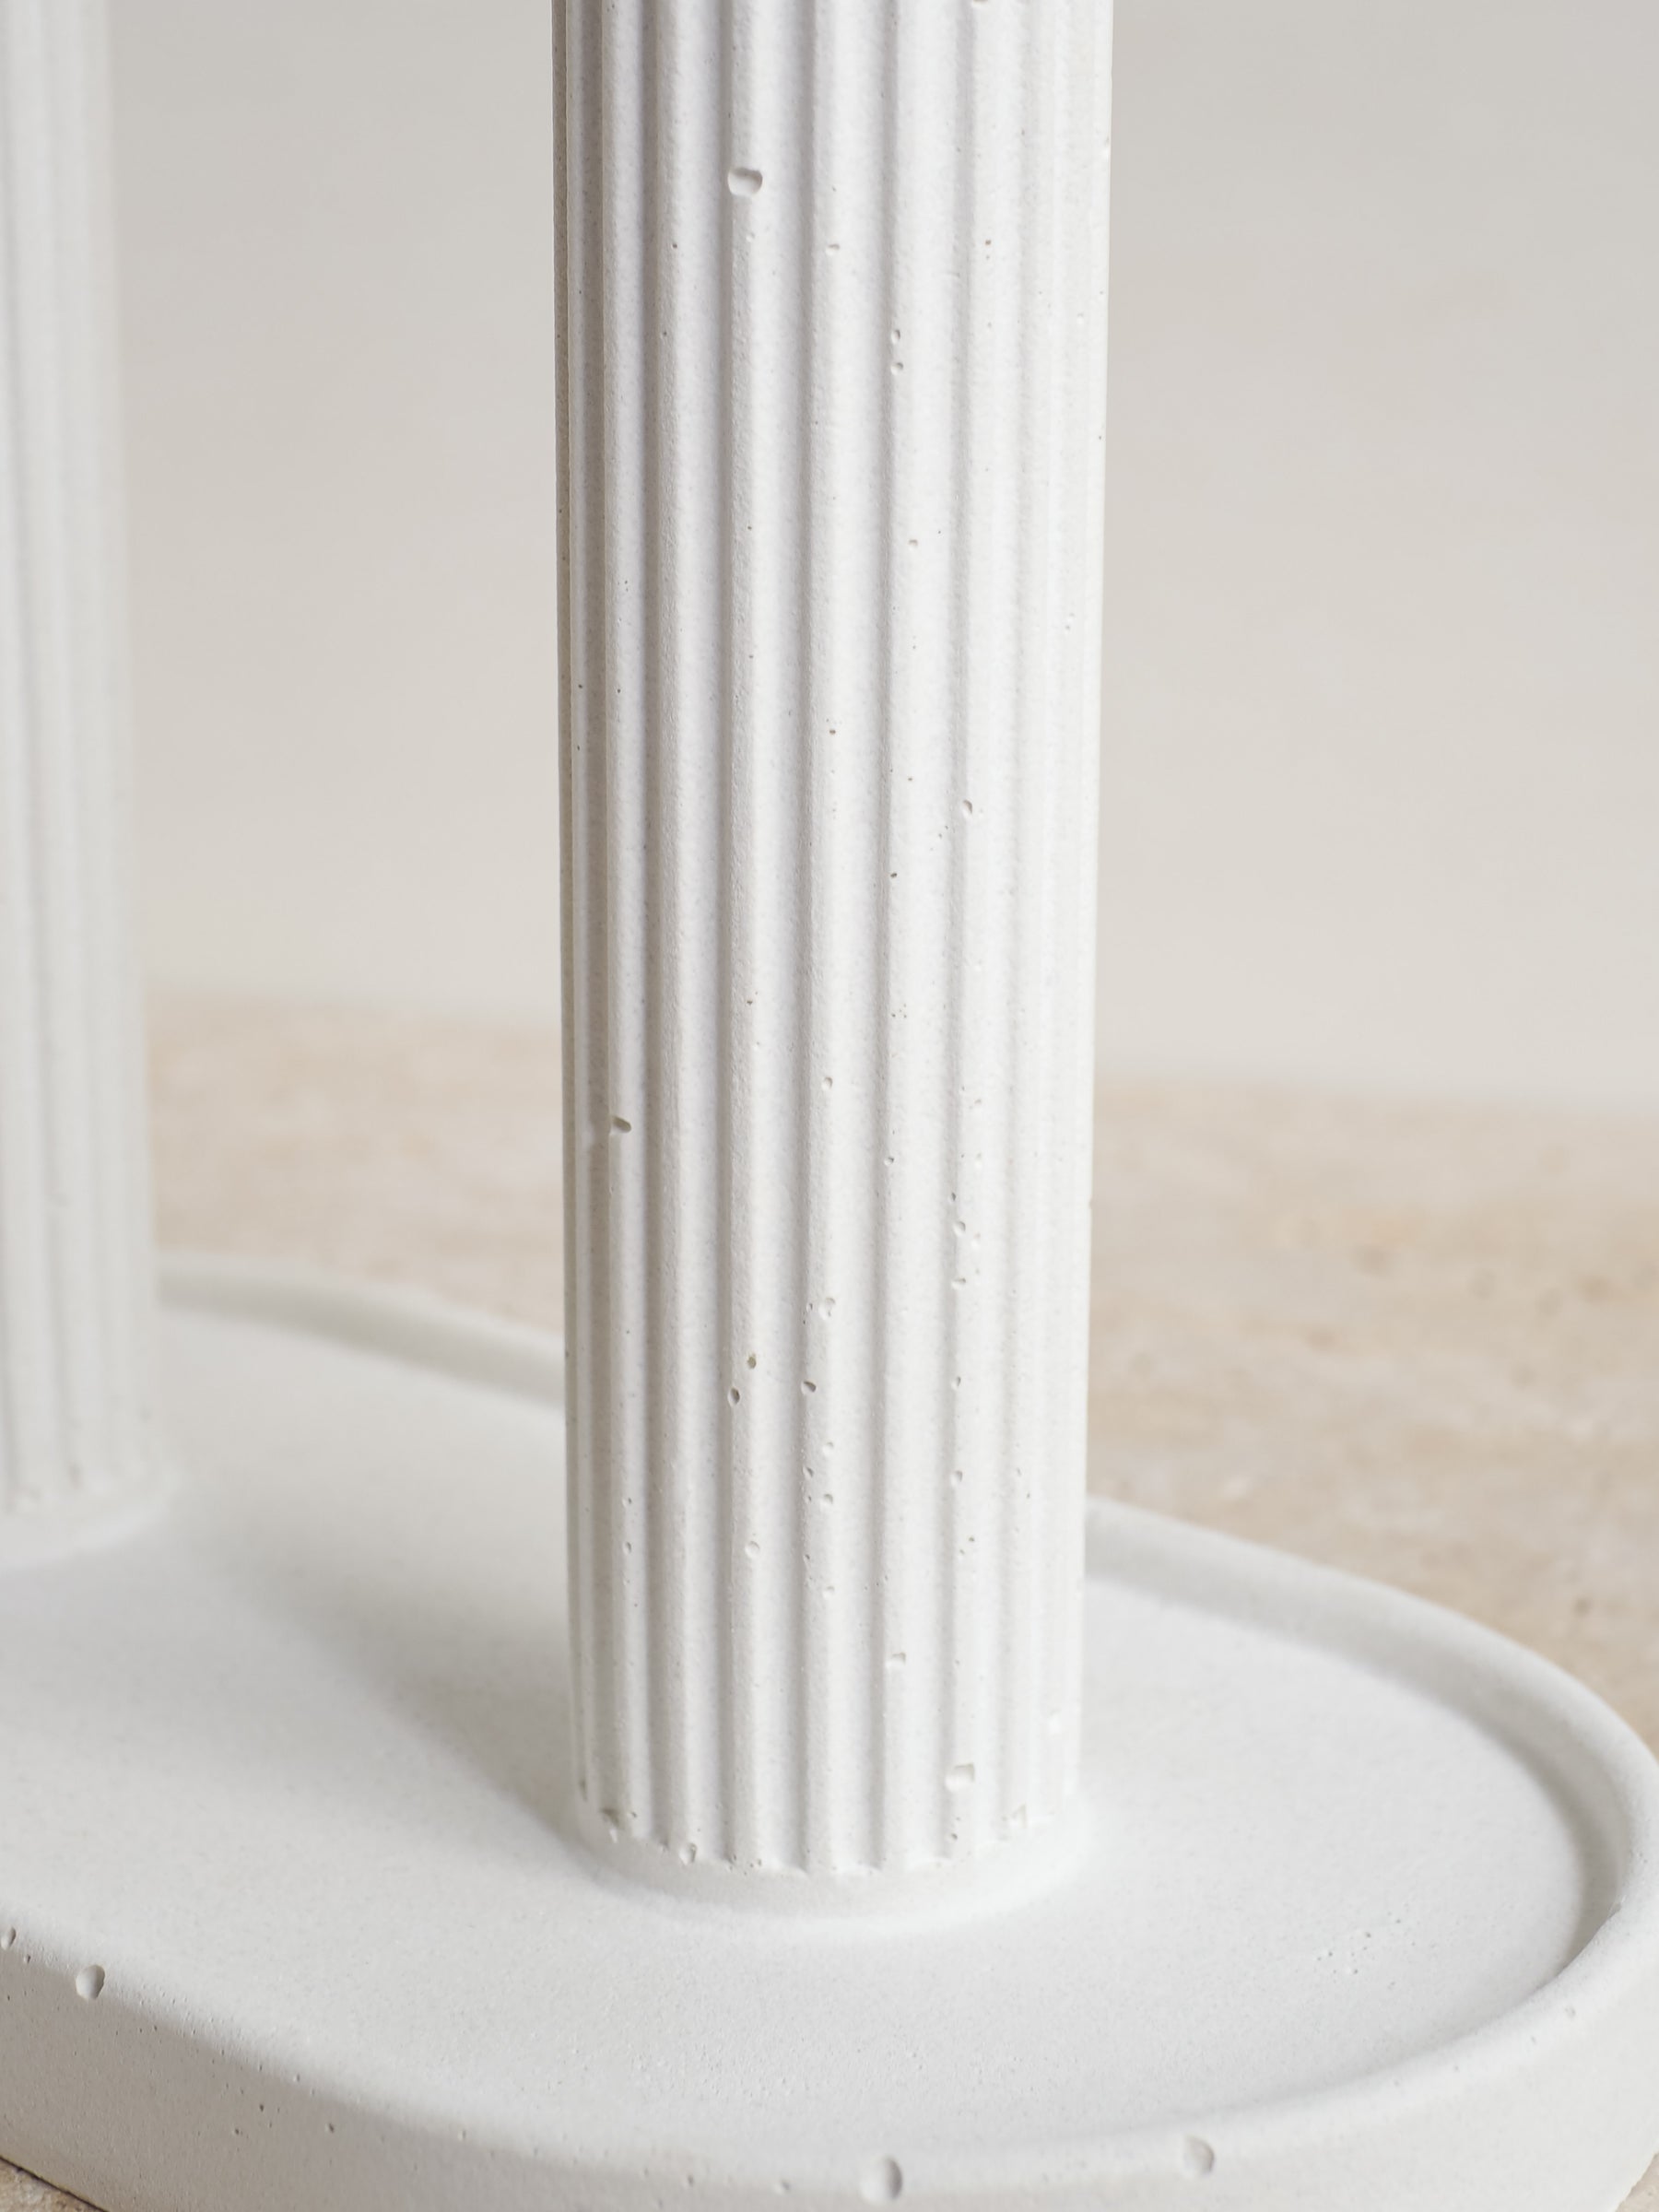 Detailed photo of our Sterling vase showing the distinct characteristics that make each piece truly unique